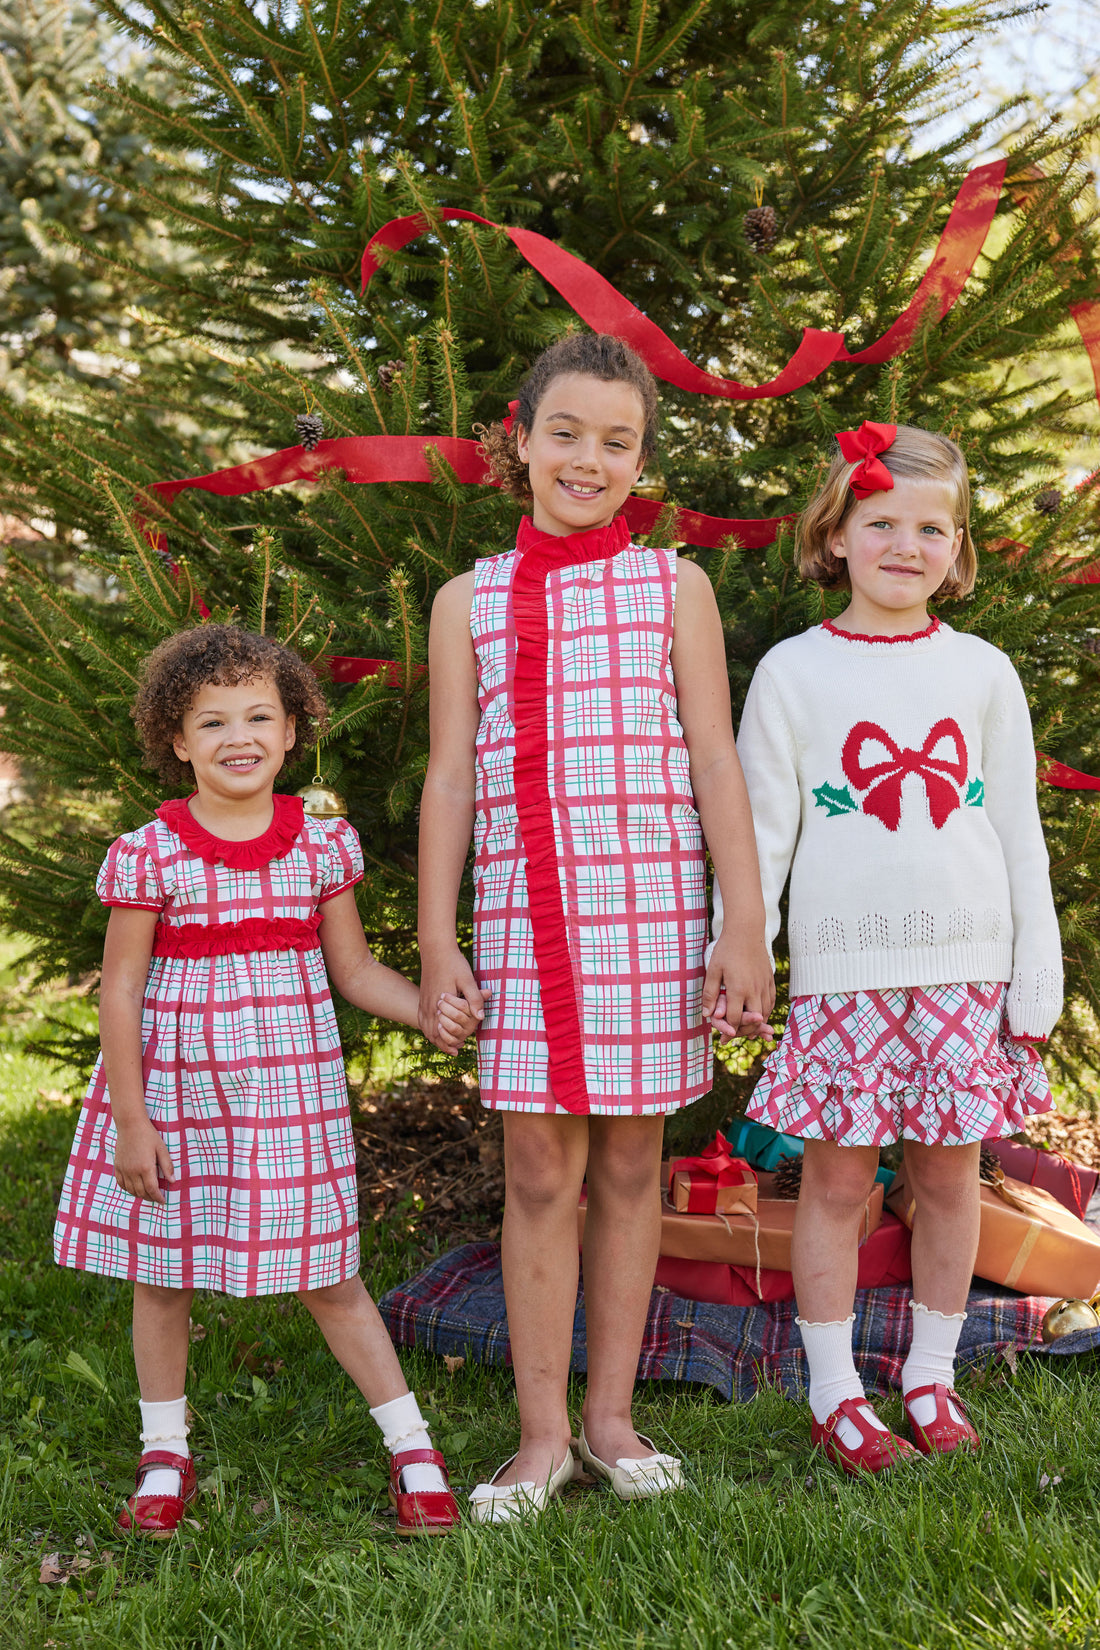 Little English classic tween girl dress in holiday plaid pattern with red ruffle running around neck and down front